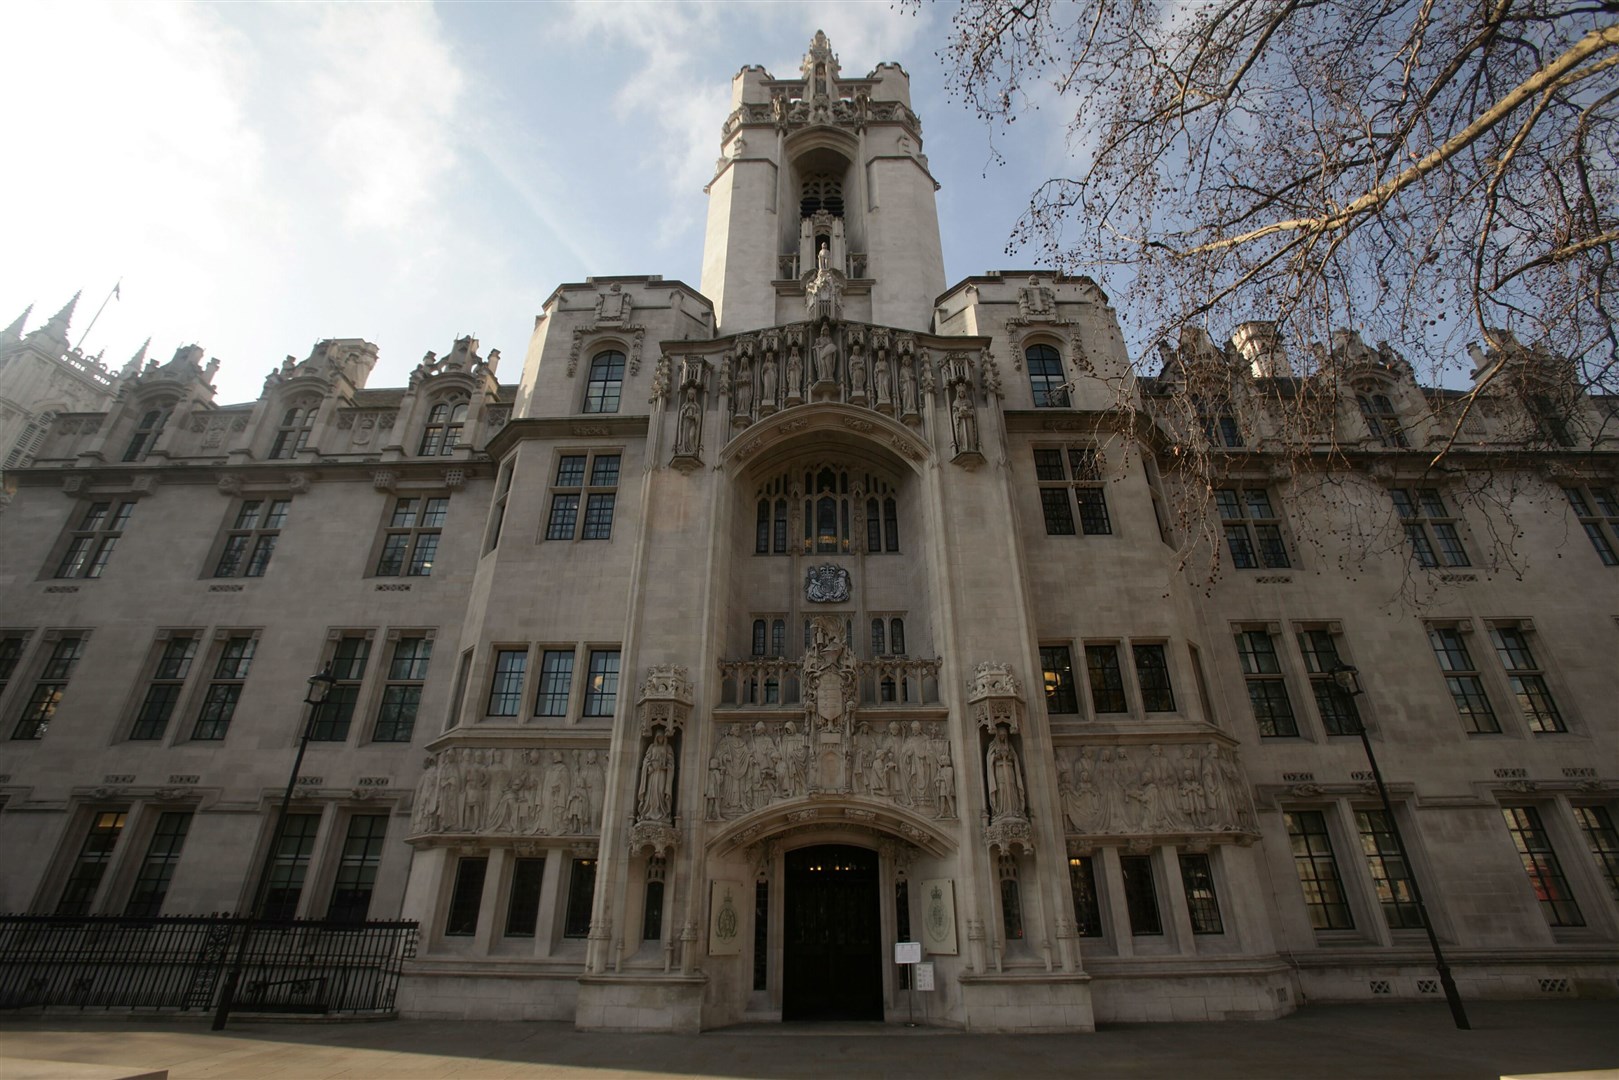 Dr Thaler’s case was heard at the Supreme Court in central London in March (Yui Mok/PA)